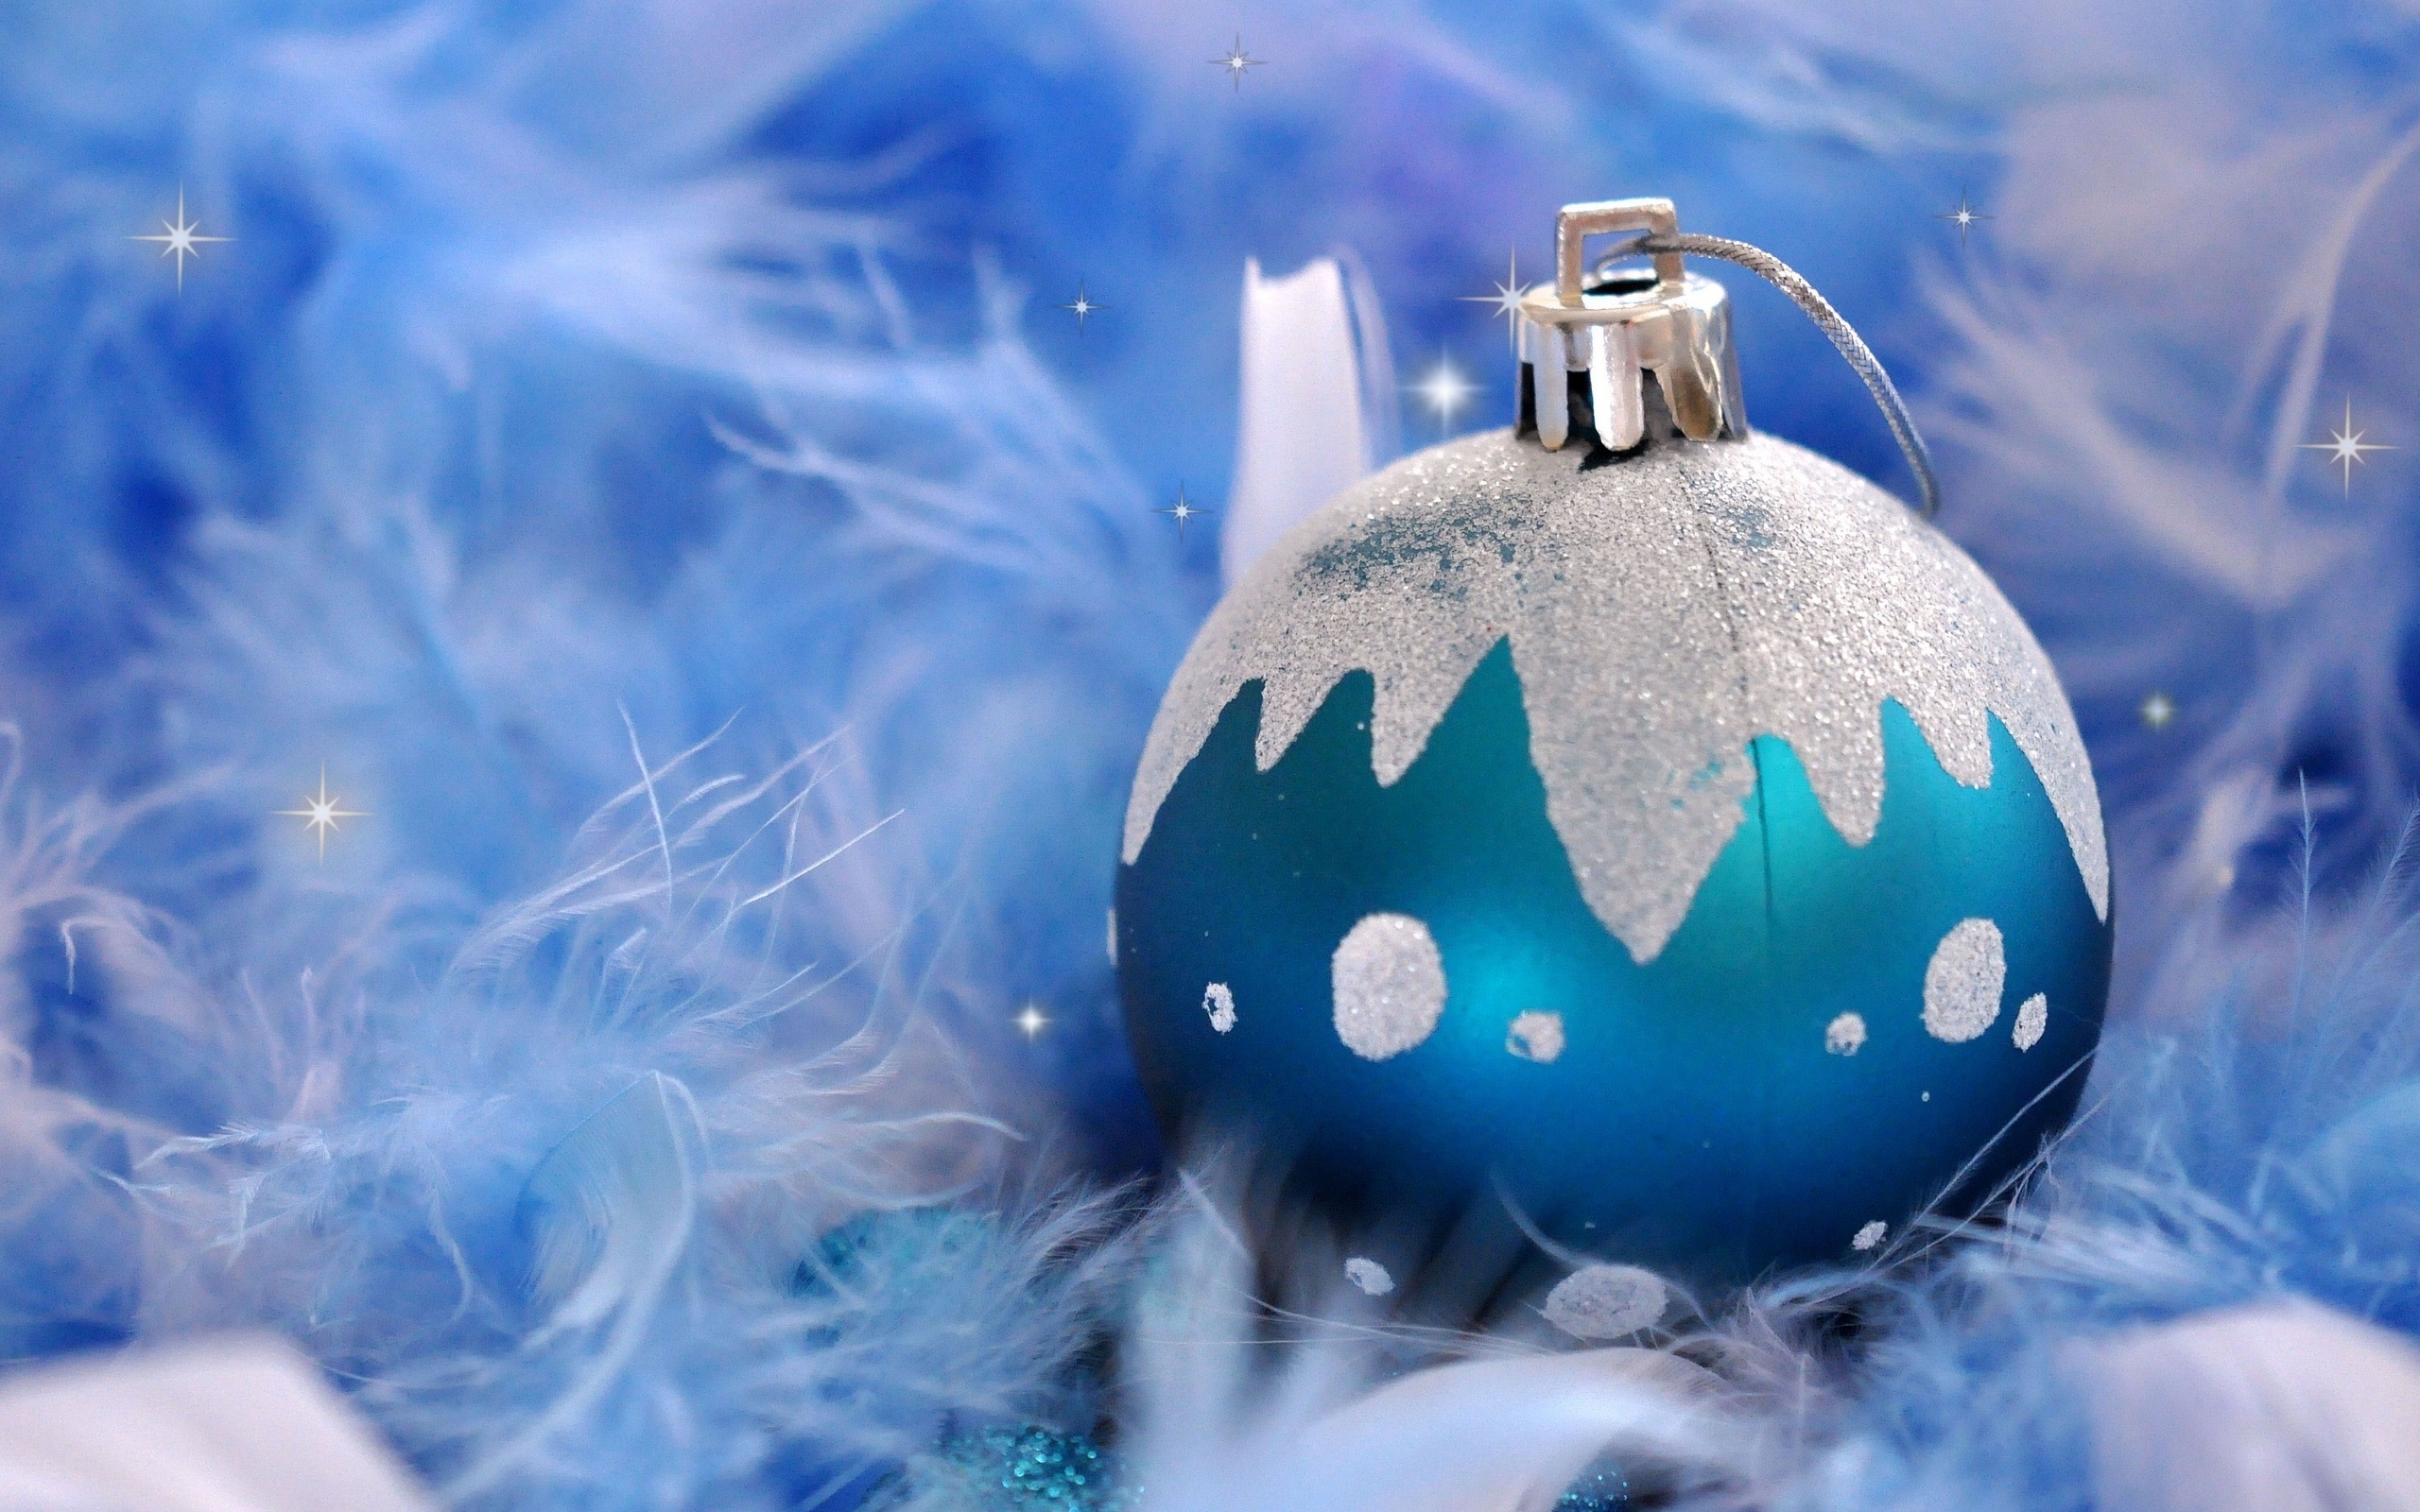 Download PC Wallpaper holidays, objects, blue